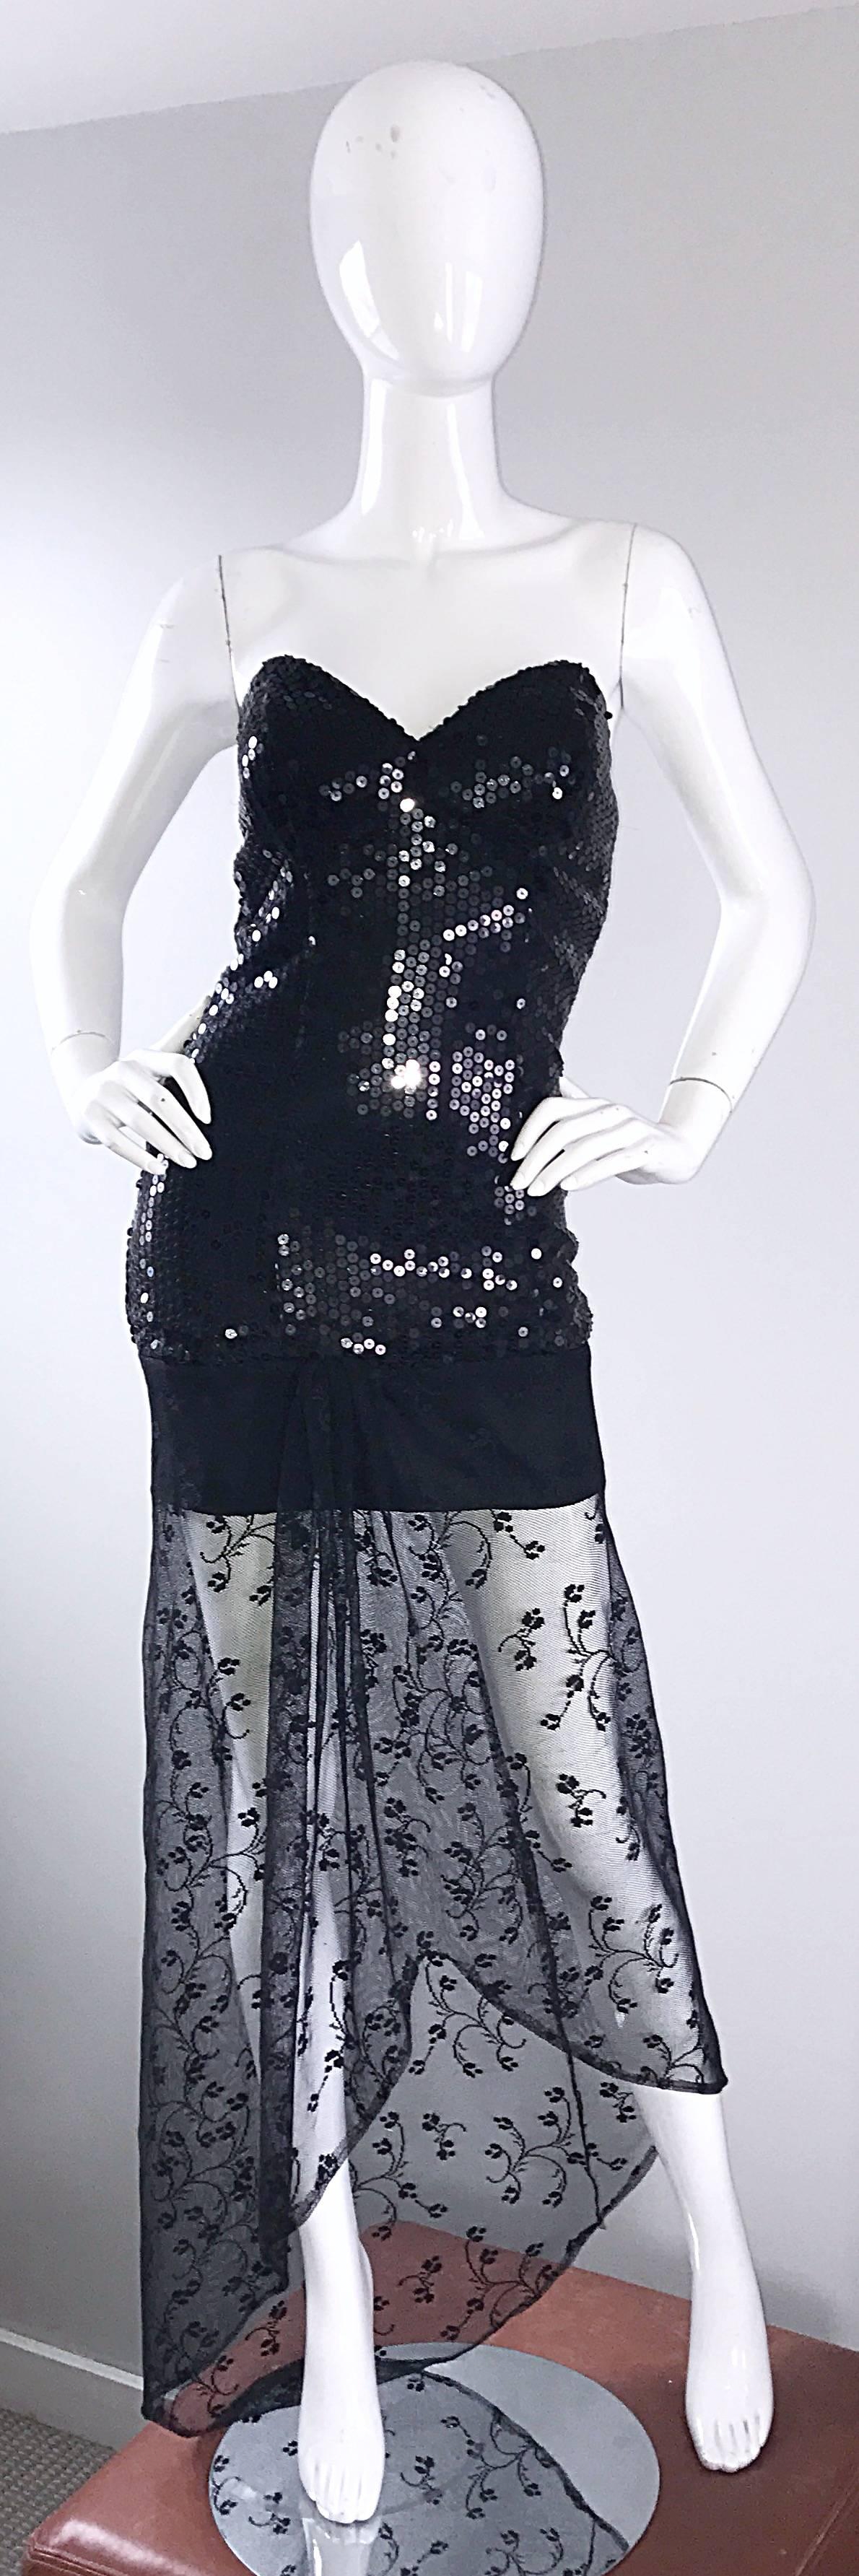 Sexy 90s black sequin hi-lo strapless bodycon dress! Features hundreds of hand-sewn black sequins throughout. Asymmetrical black French lace hem dips to a longer train in the back. Hidden zipper up the back with hook-and-eye closure. Interior boning